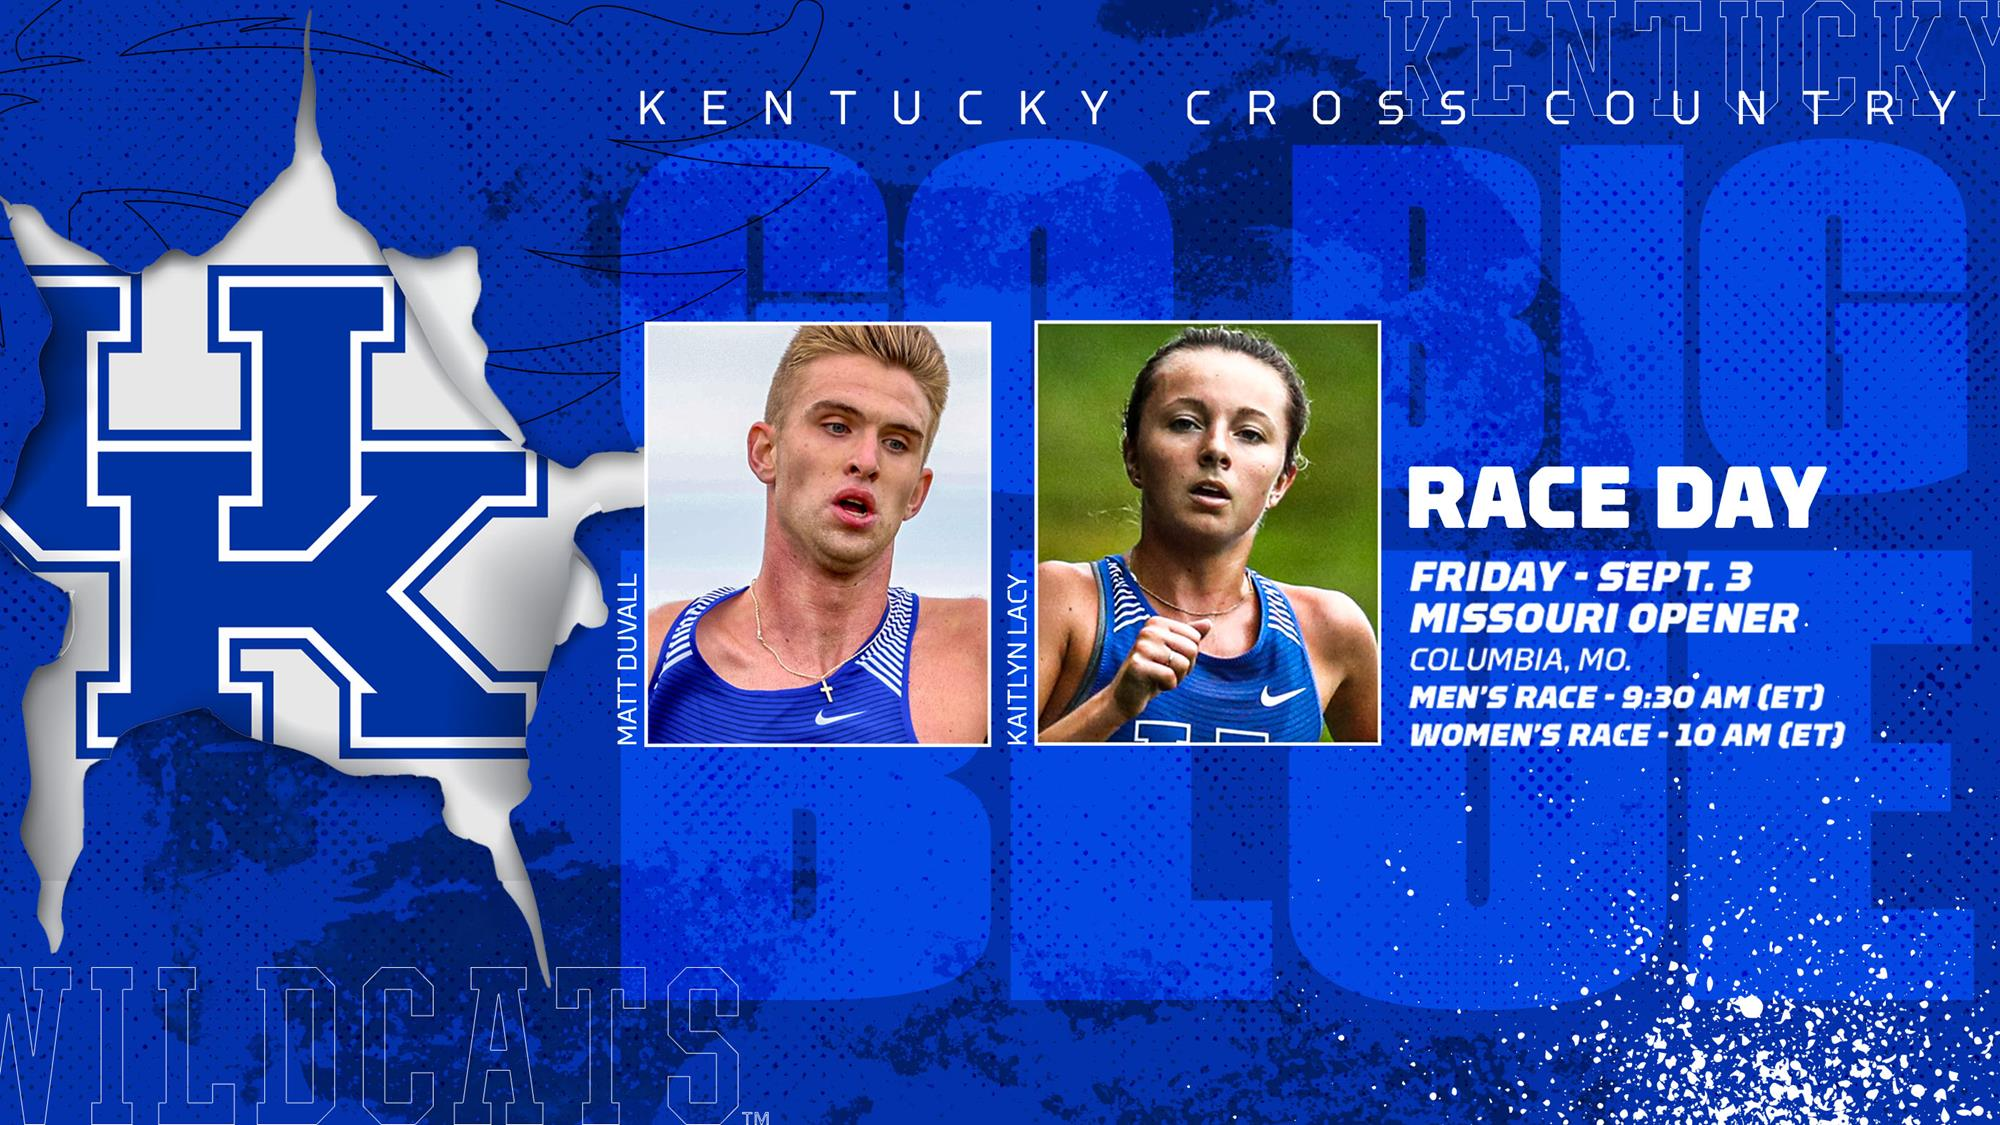 UK Cross Country Travels to Mizzou for First Meet of 2021 Season